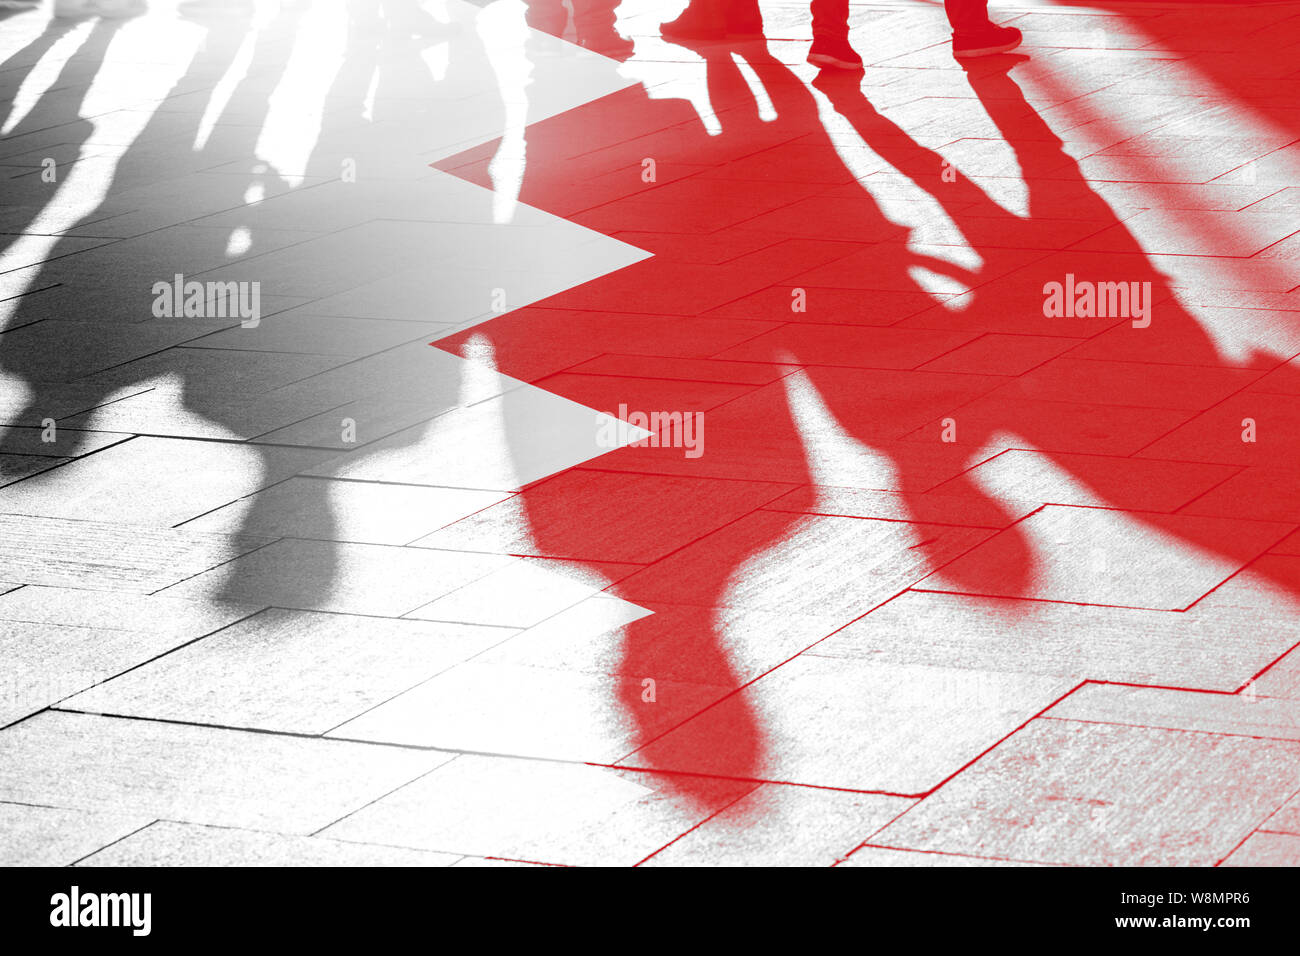 National Flag of Bahrain and Shadows of People, Concept Picture About Independence Stockfoto